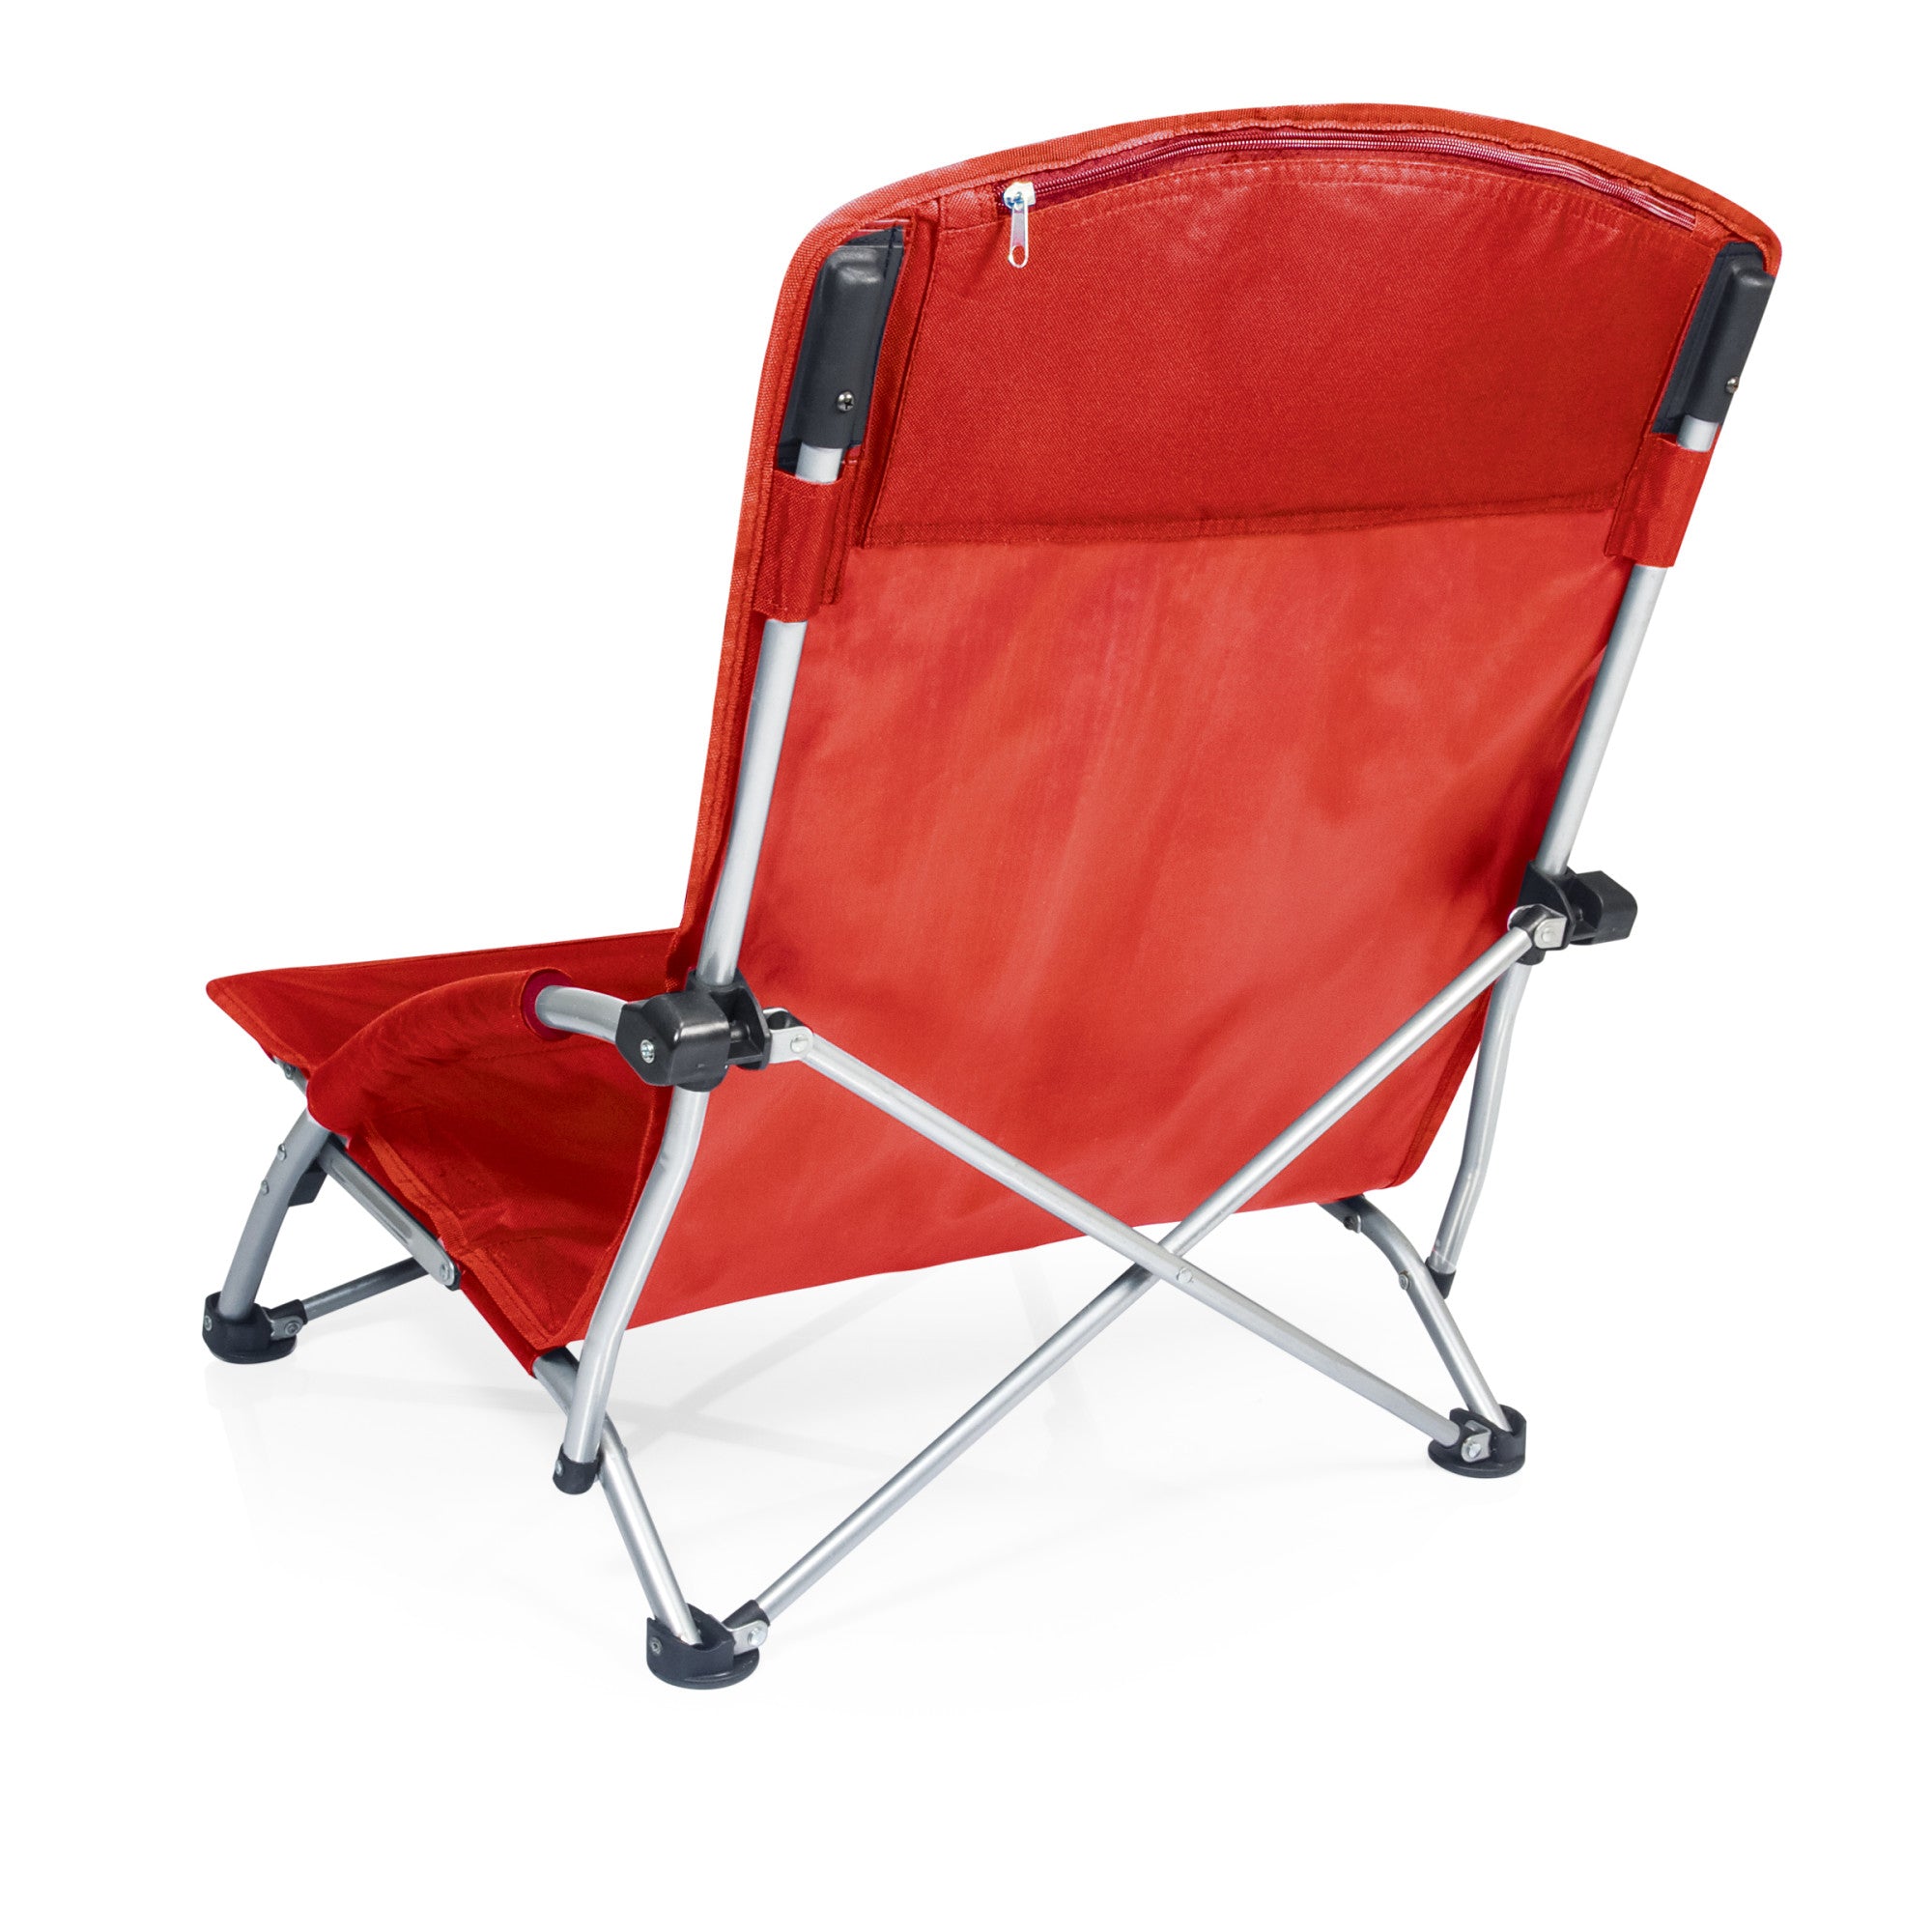 Iowa State Cyclones - Tranquility Beach Chair with Carry Bag